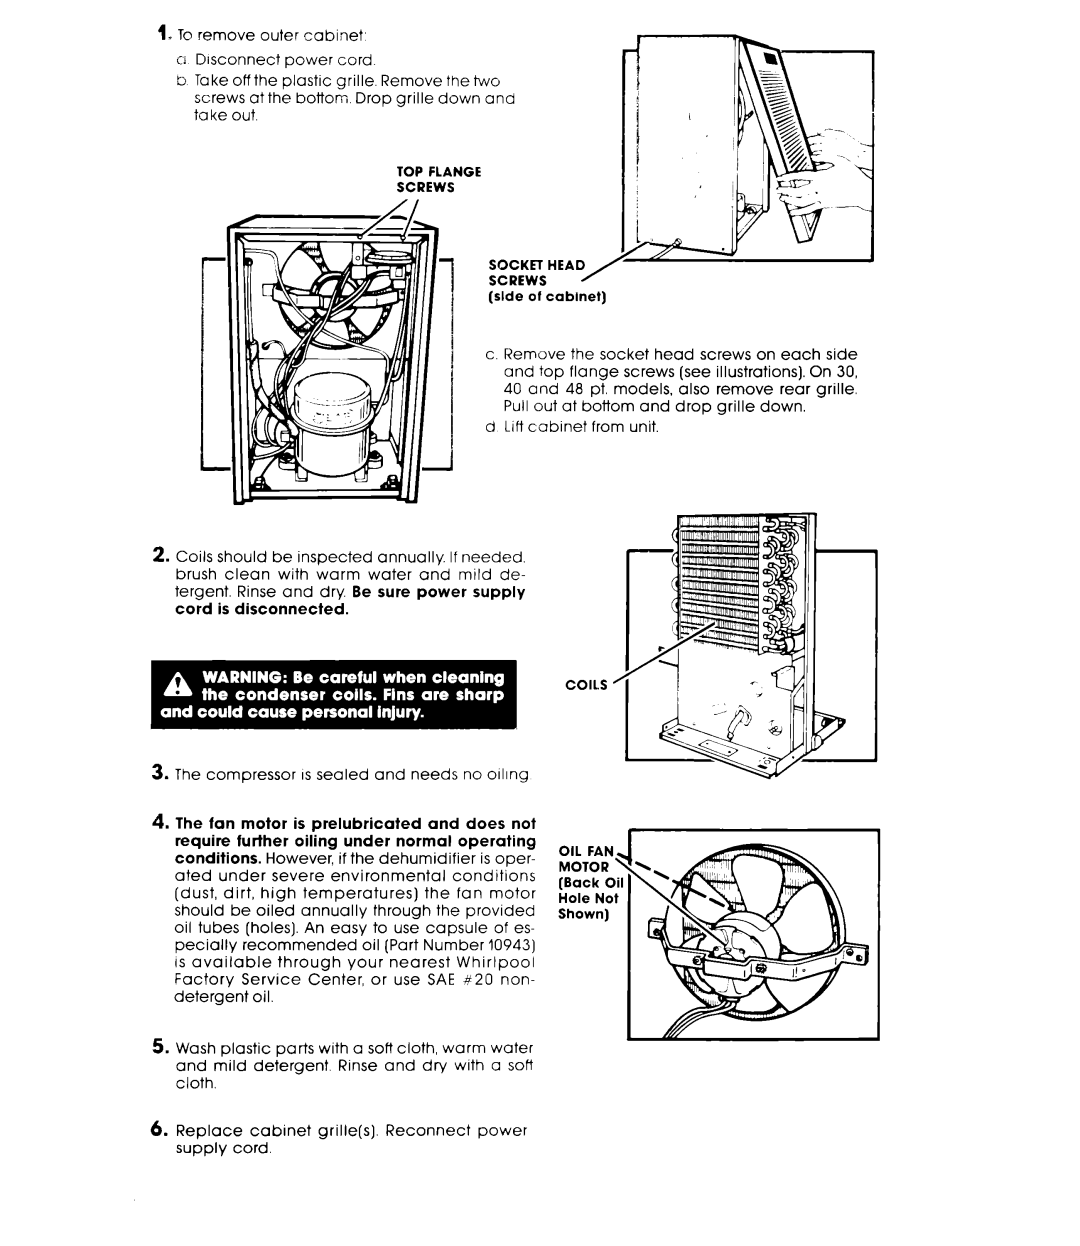 Whirlpool AD0402XS0 manual To remove outer cabinet o Disconnect power cord, TOP FLANGE SCREWS side of cabinet, Coils 